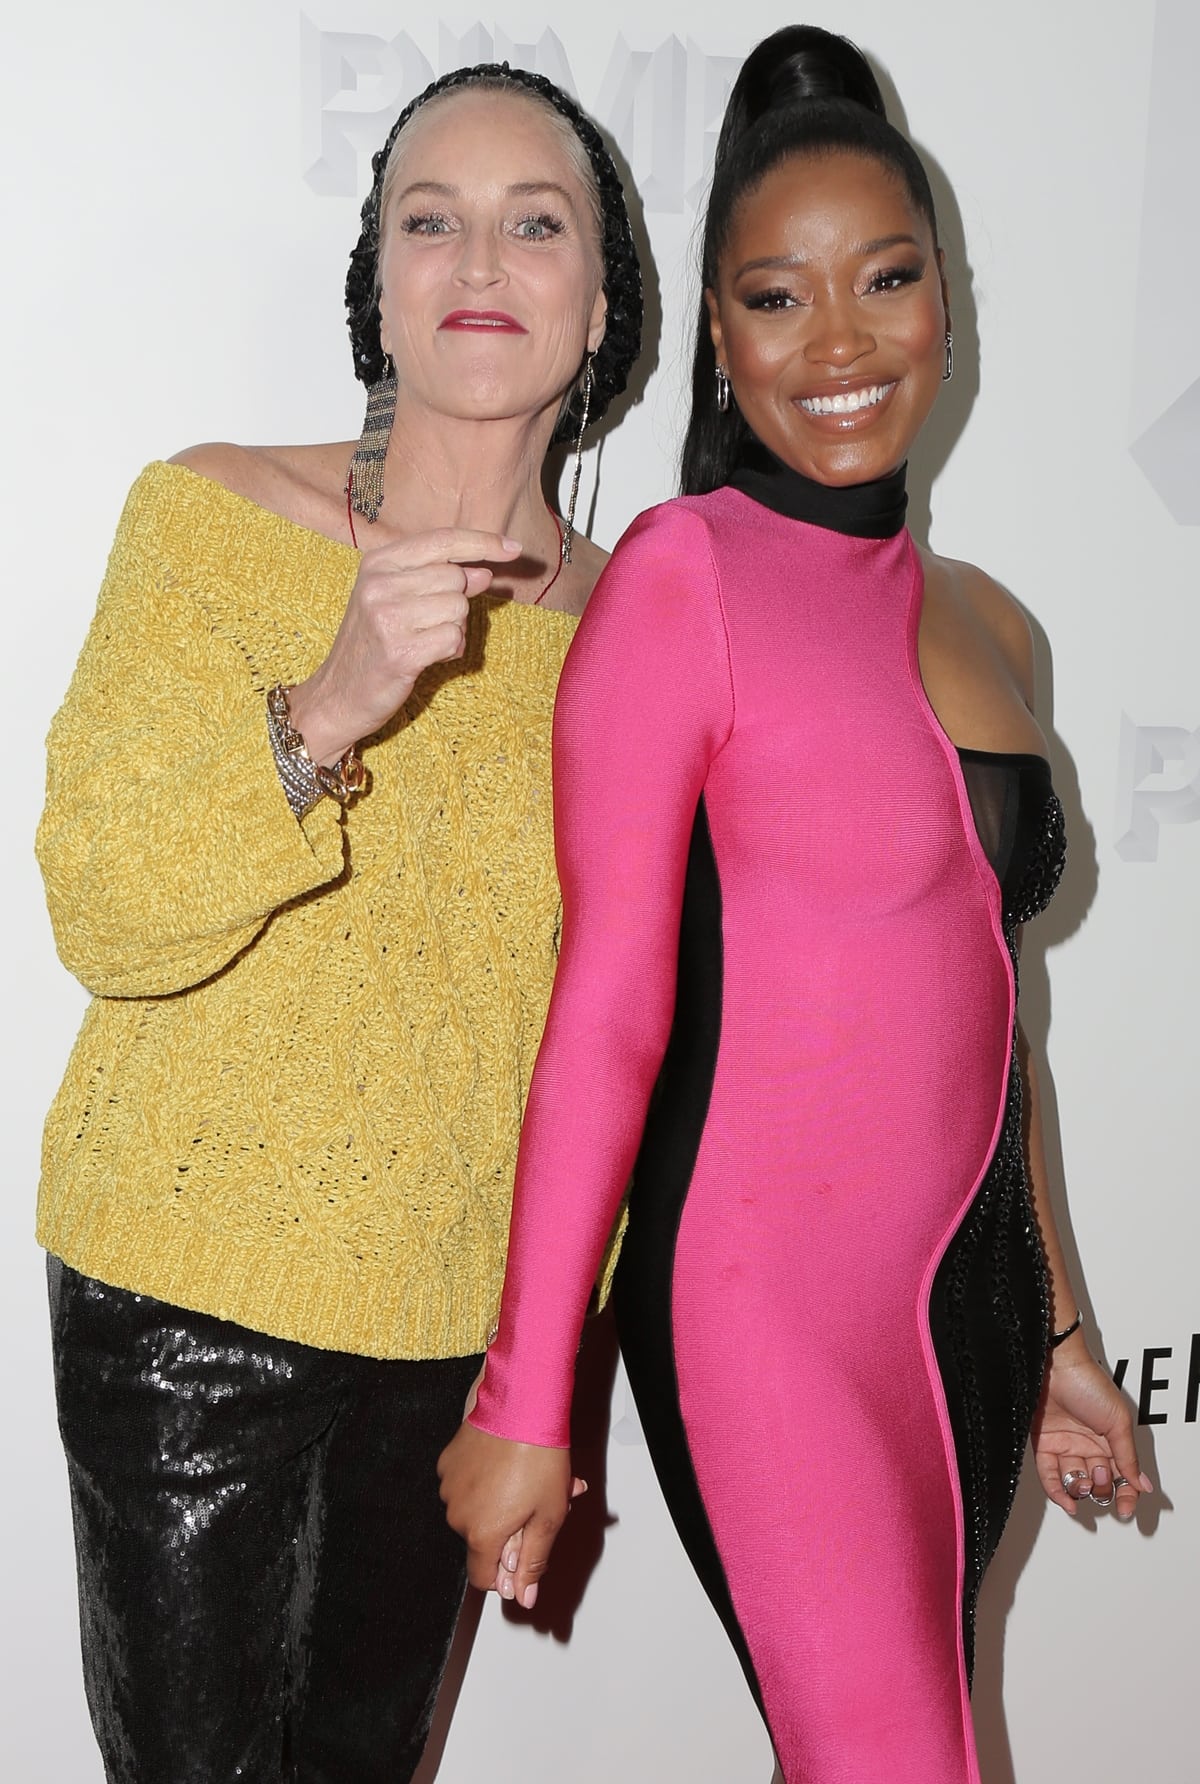 Keke Palmer in a pink and black dress with Sharon Stone at the premiere of Vertical Entertainment's "Pimp"